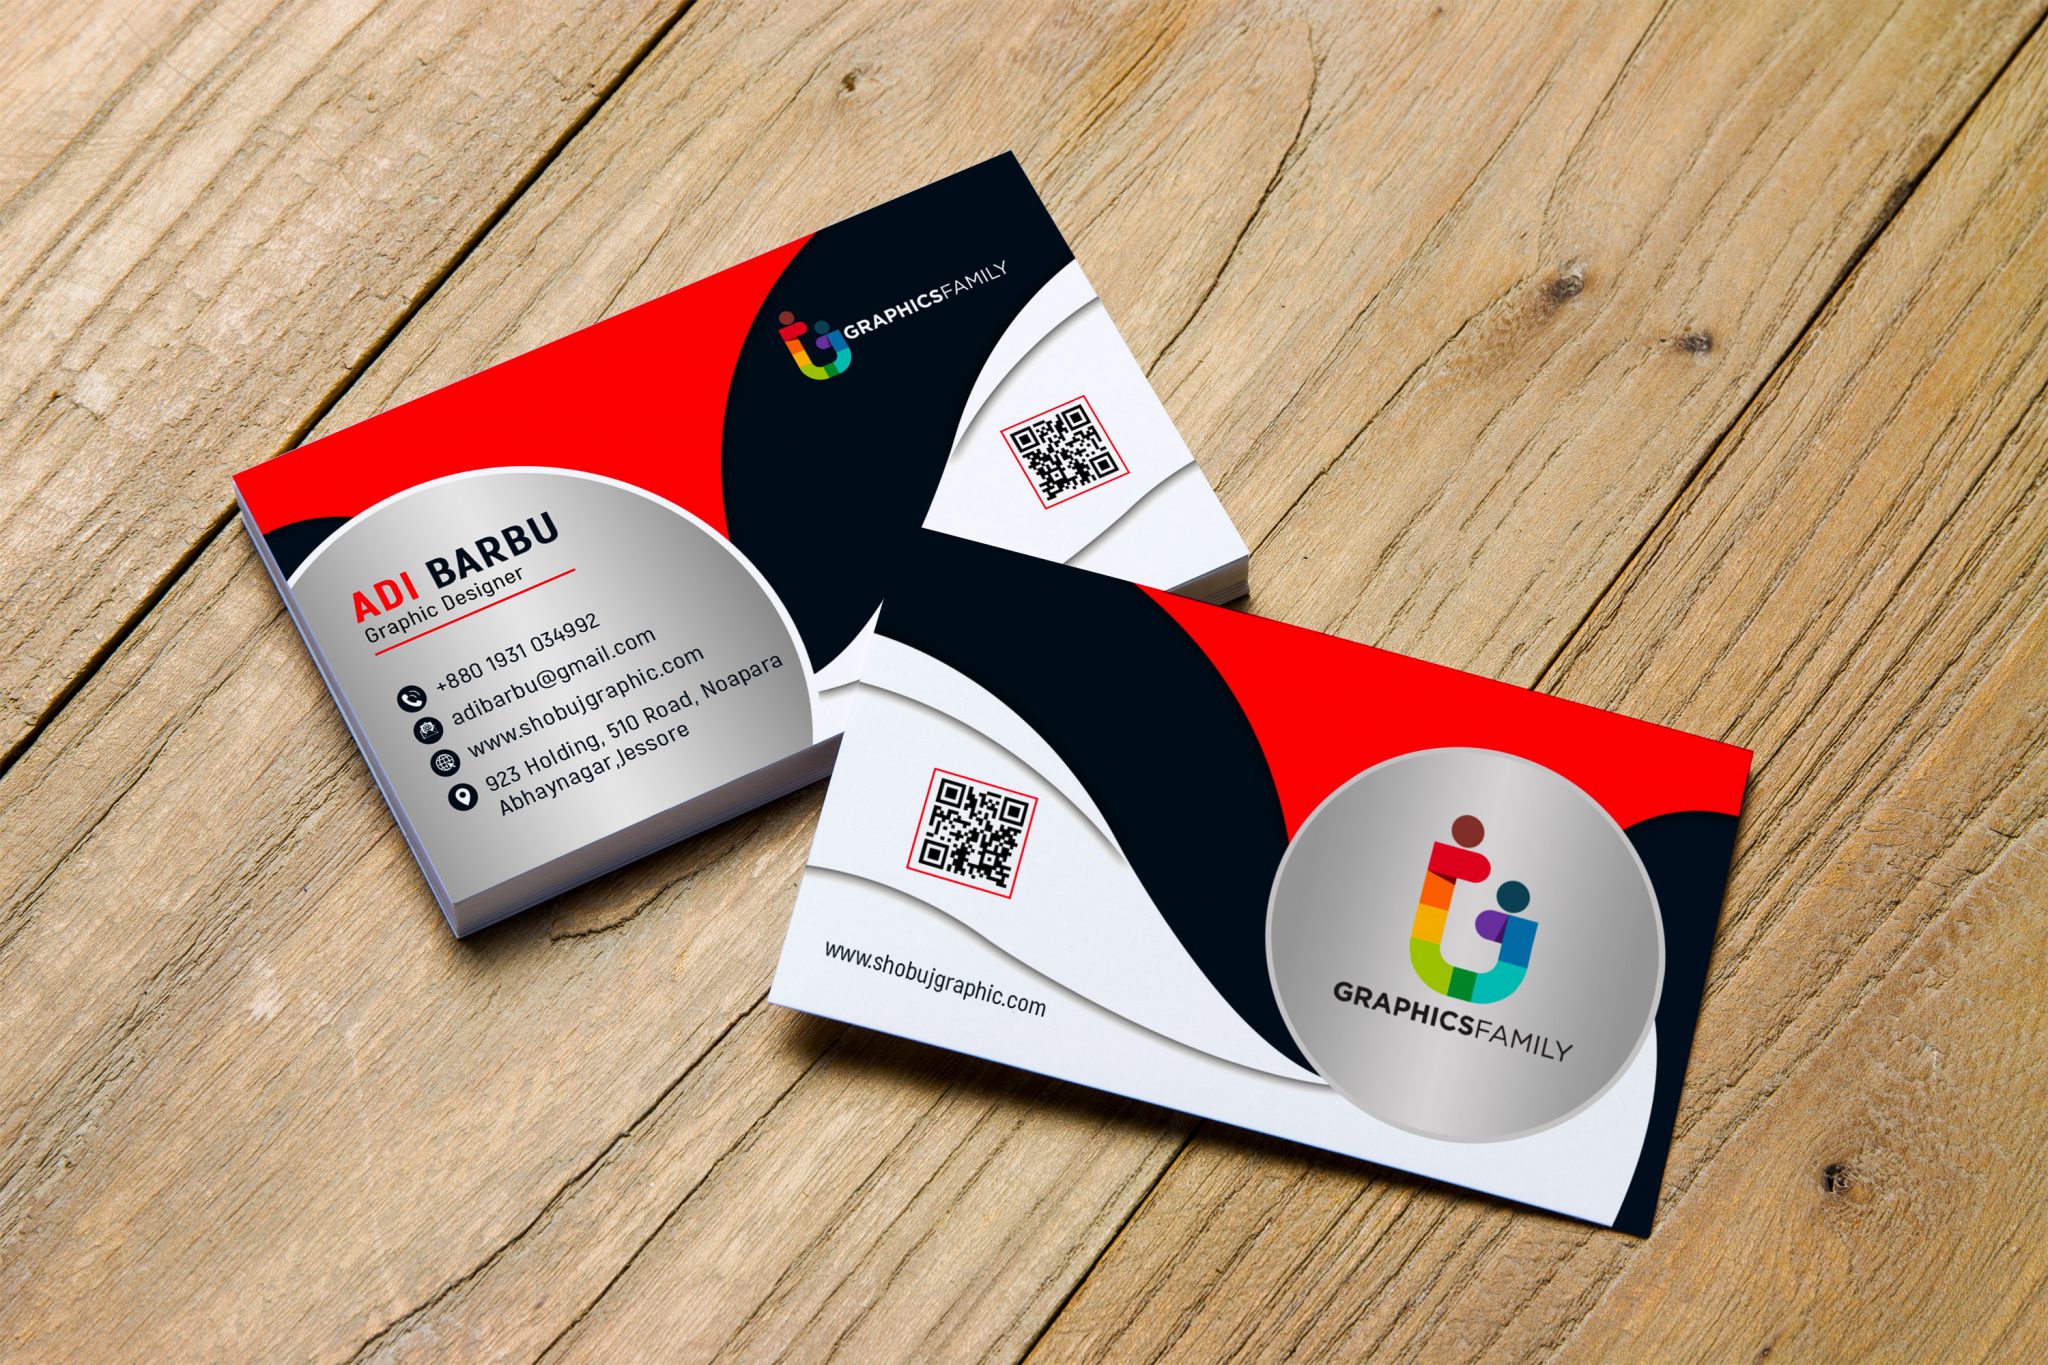 websites to create a business card